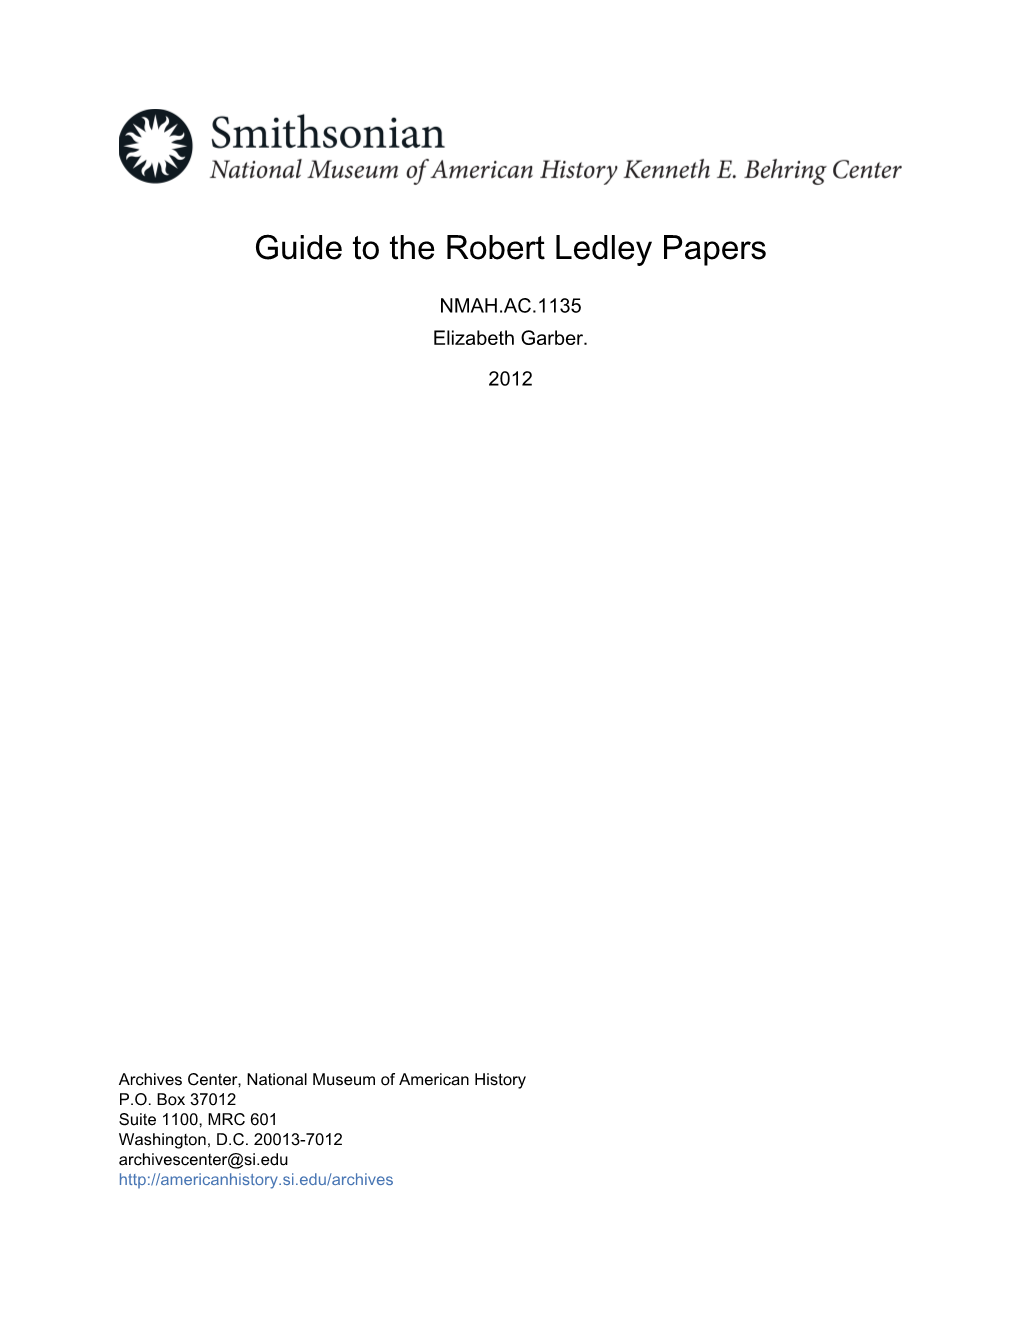 Guide to the Robert Ledley Papers